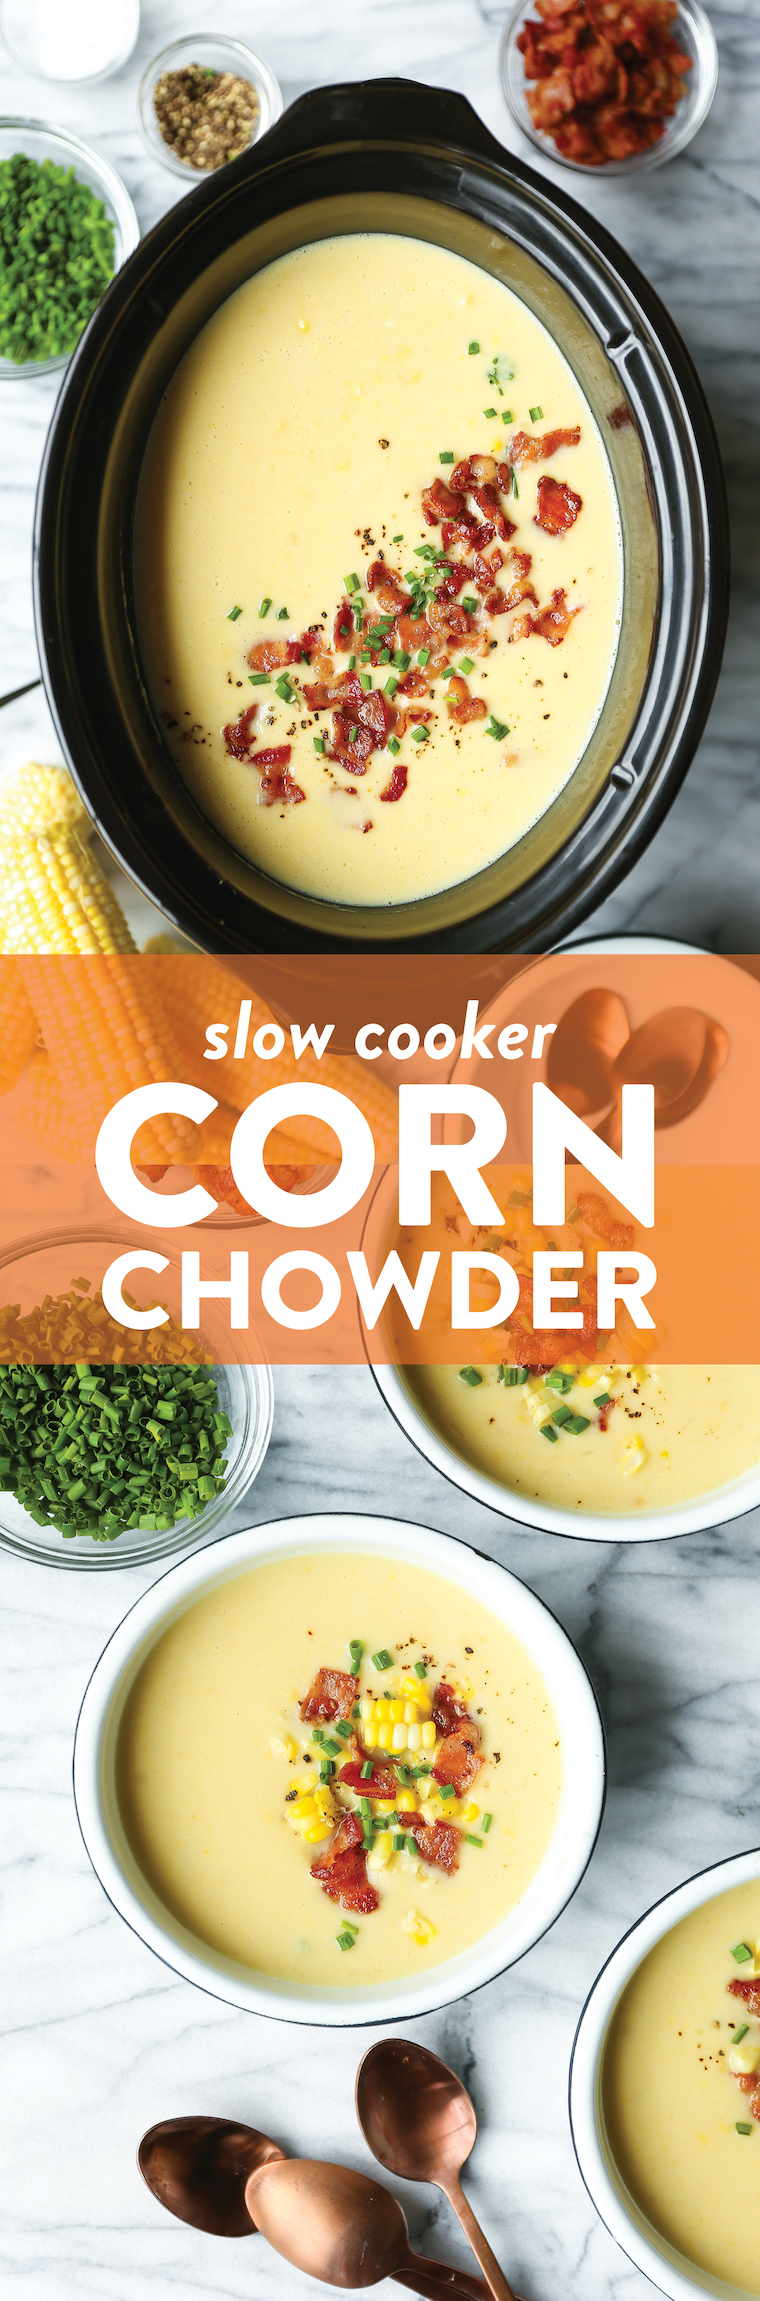 Slow Cooker Corn Chowder - The easiest crockpot soup ever! Fresh corn kernels, bacon, potato, stock, garlic, thyme. Topped with crisp bacon bits and chives.